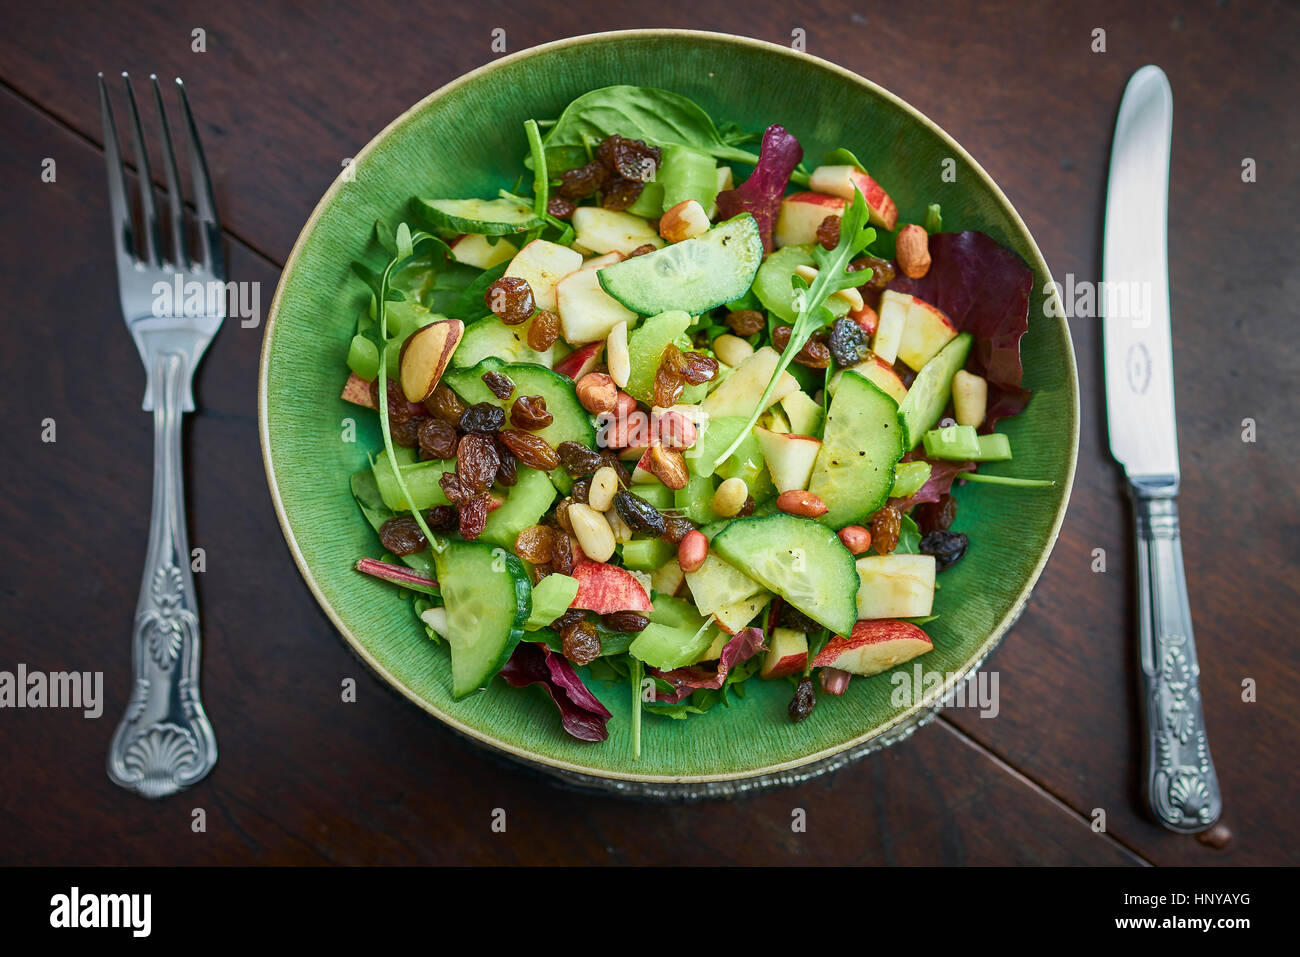 A healthy green salad in a bowl on the table Stock Photo